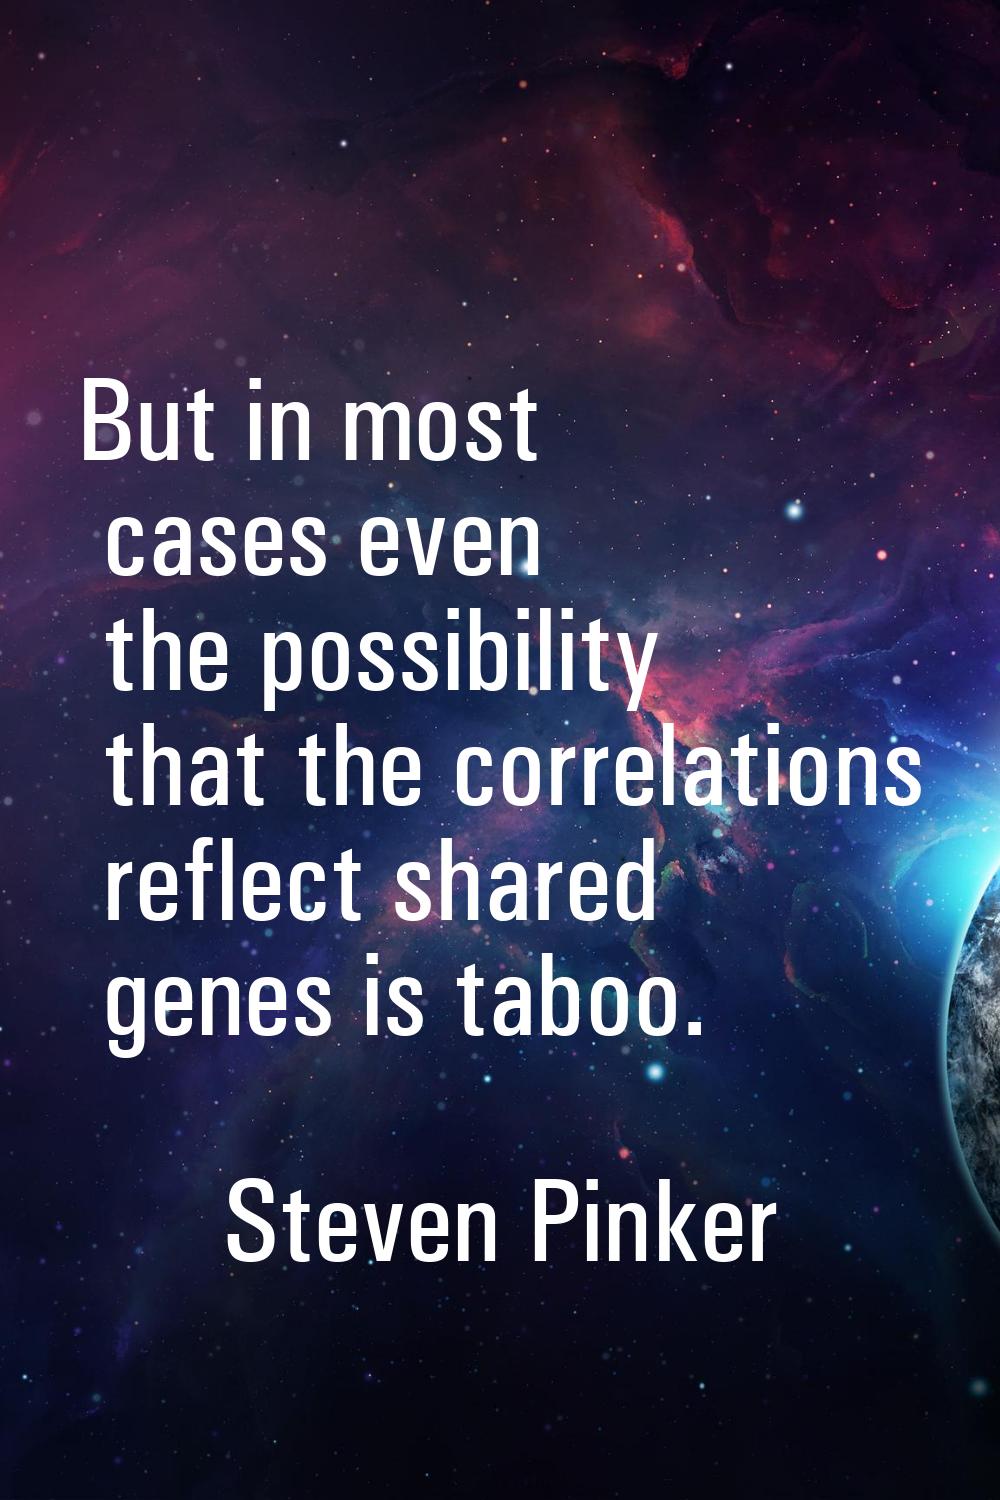 But in most cases even the possibility that the correlations reflect shared genes is taboo.